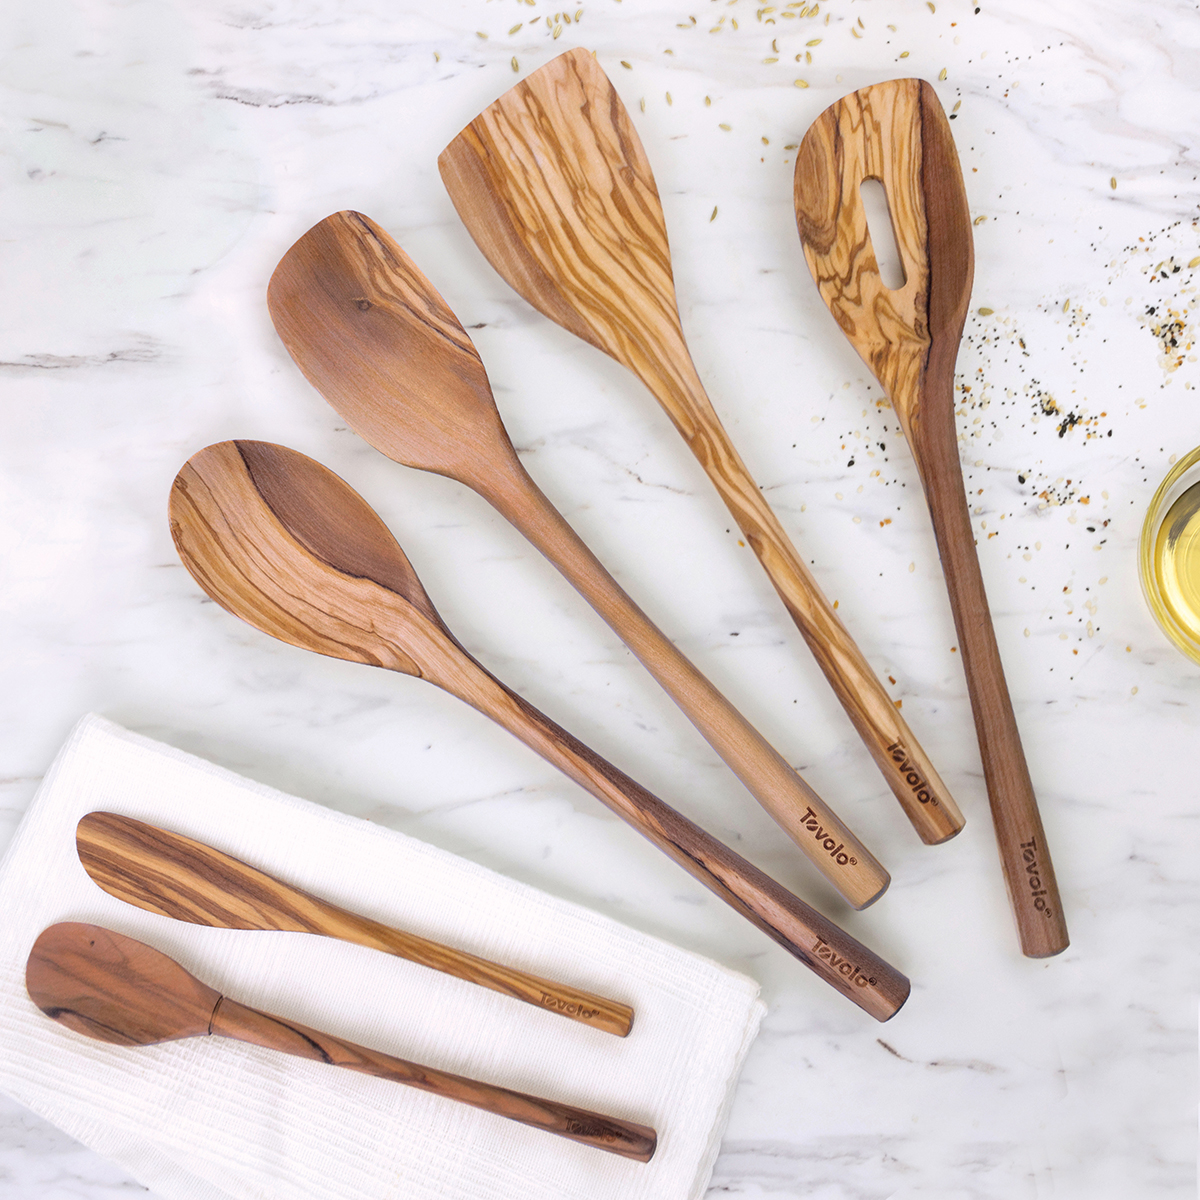 https://www.containerstore.com/catalogimages/514593/10098745_Spatula_Set_Olivewood_LIFES.jpg